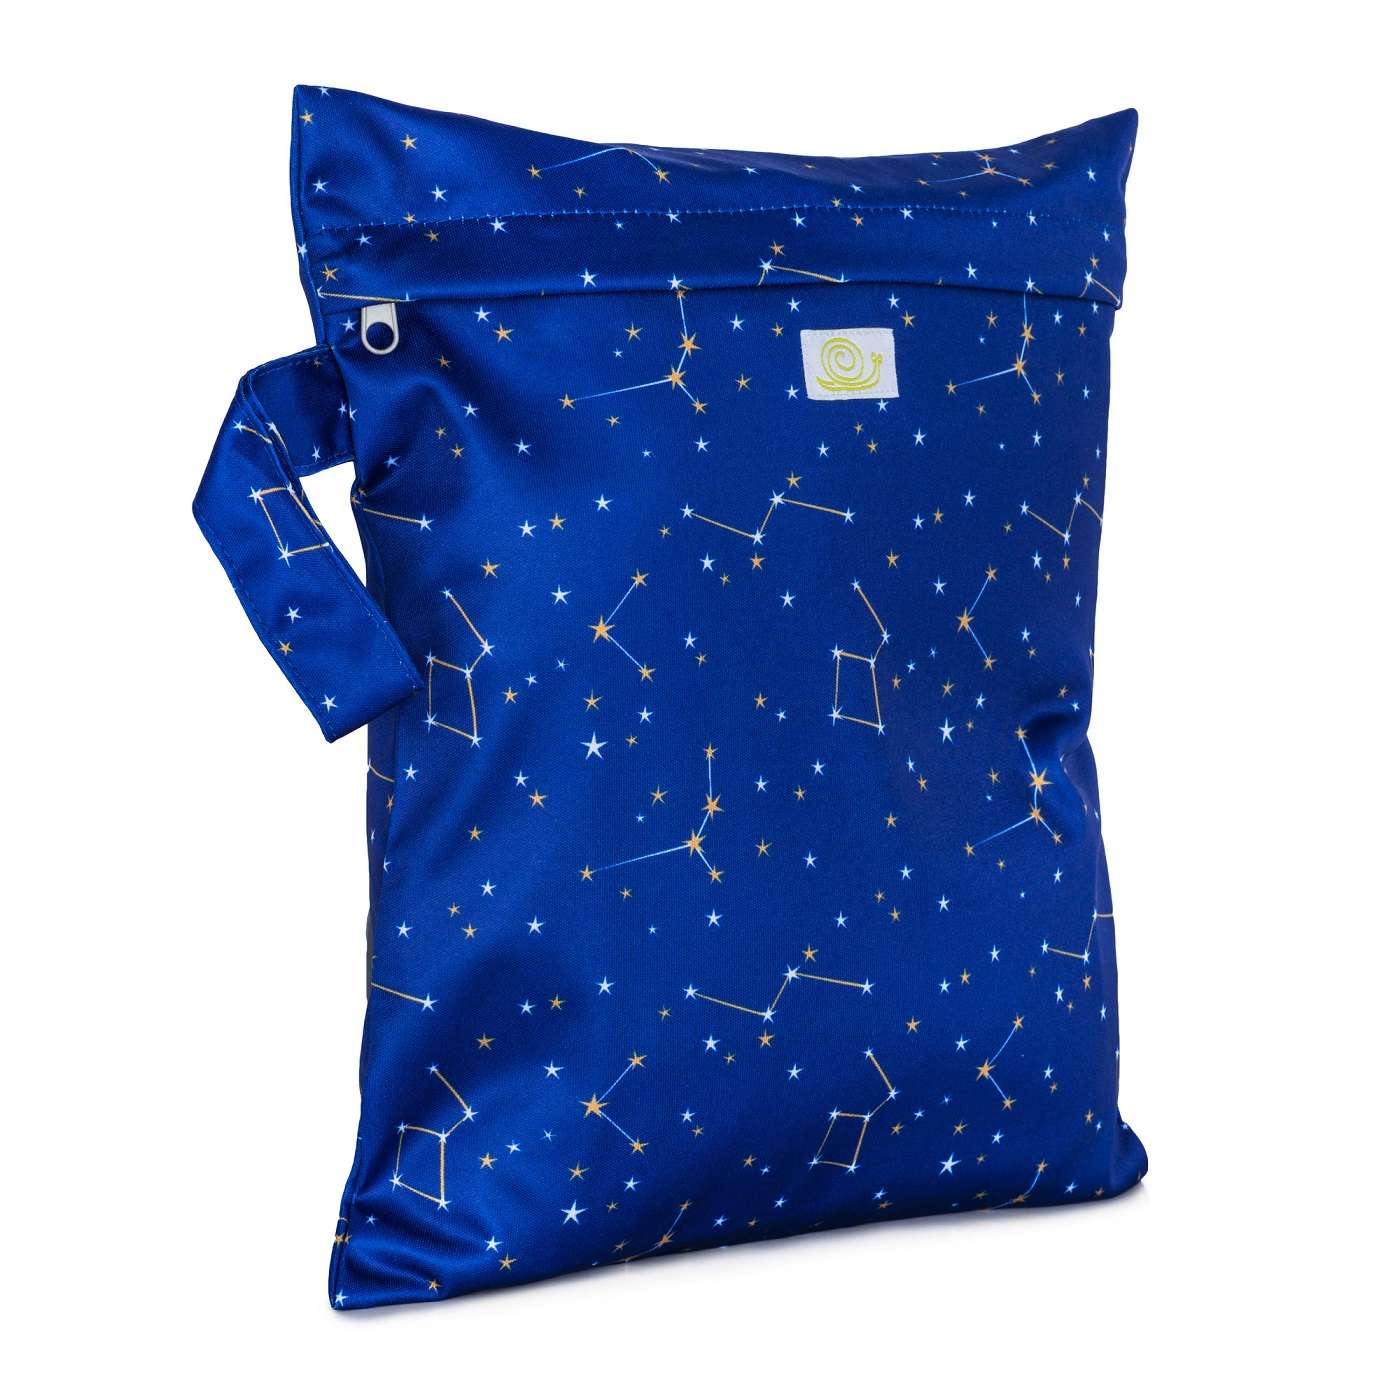 Baba+Boo Small Nappy Bag Constellations